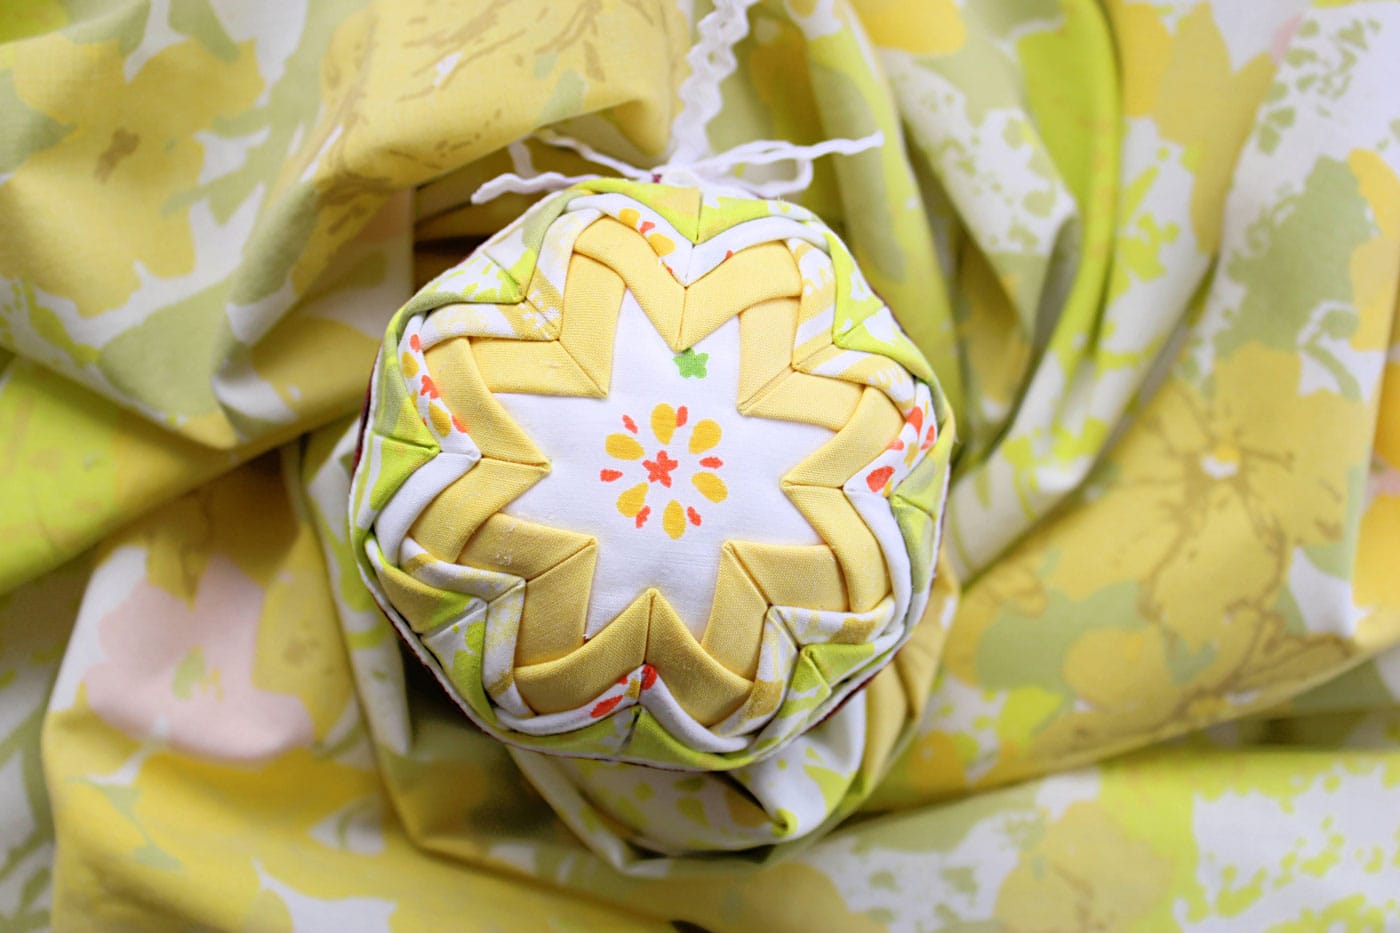 yellow and white vintage folded fabric ornament on white table with fabric scraps